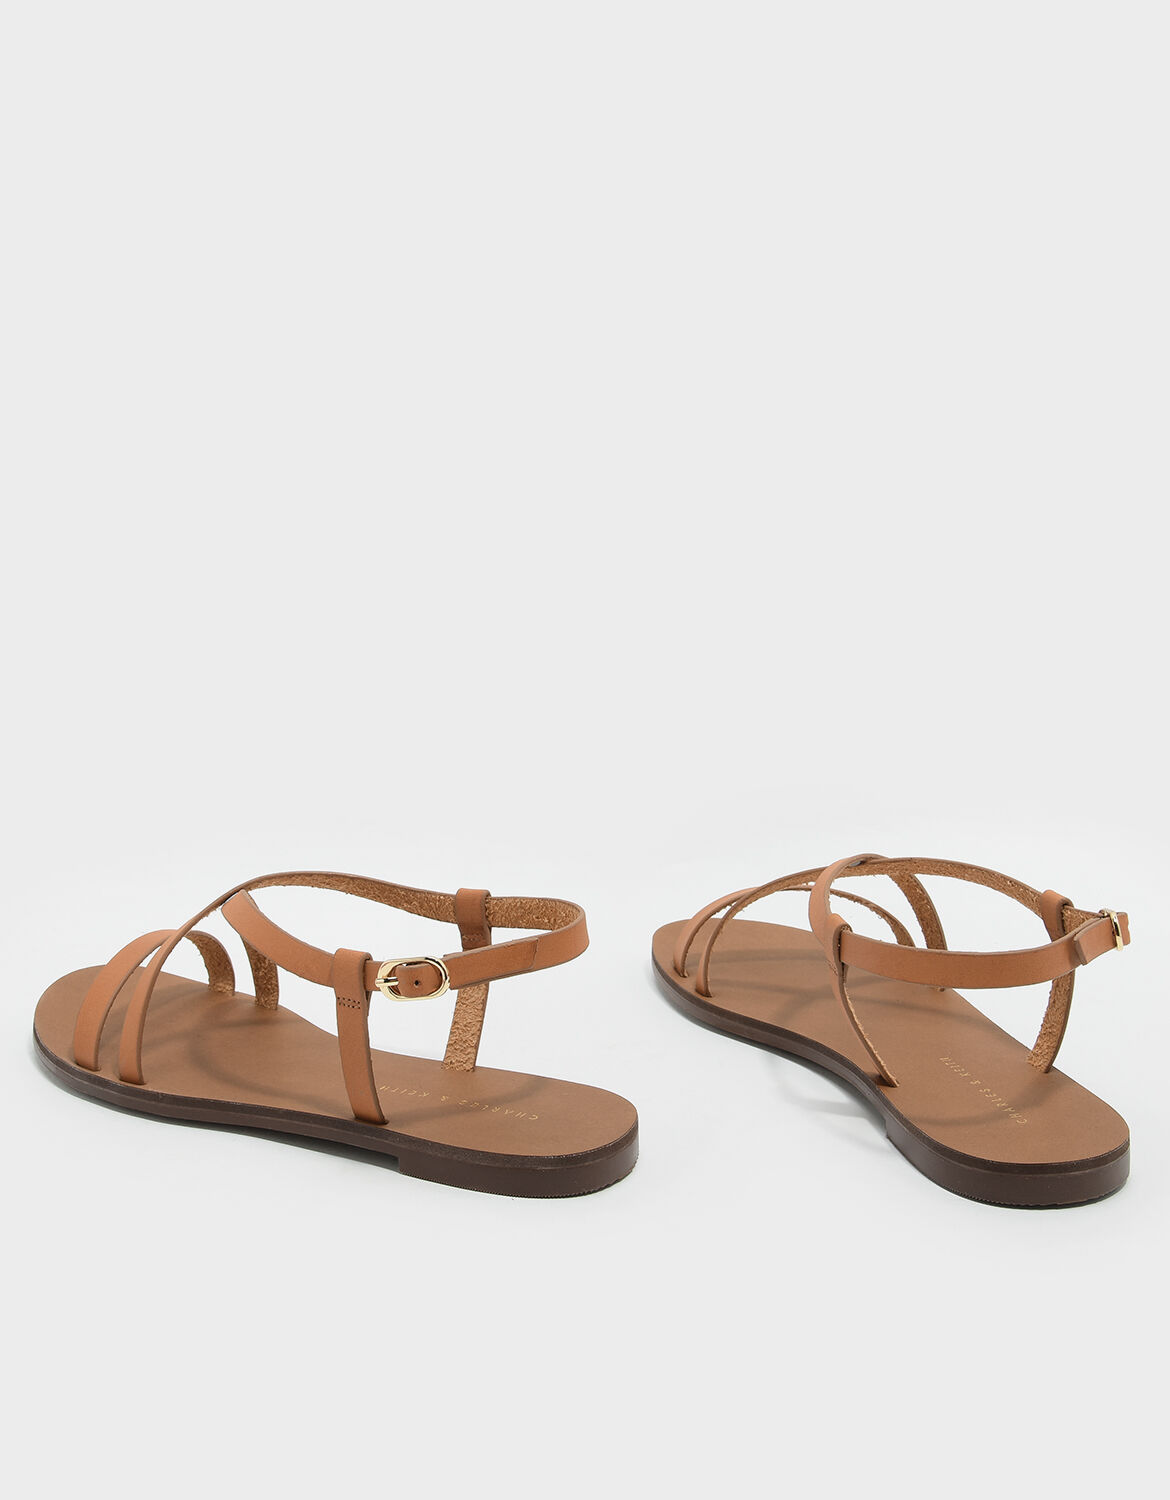 Brown Criss Cross Sandals - CHARLES & KEITH SG